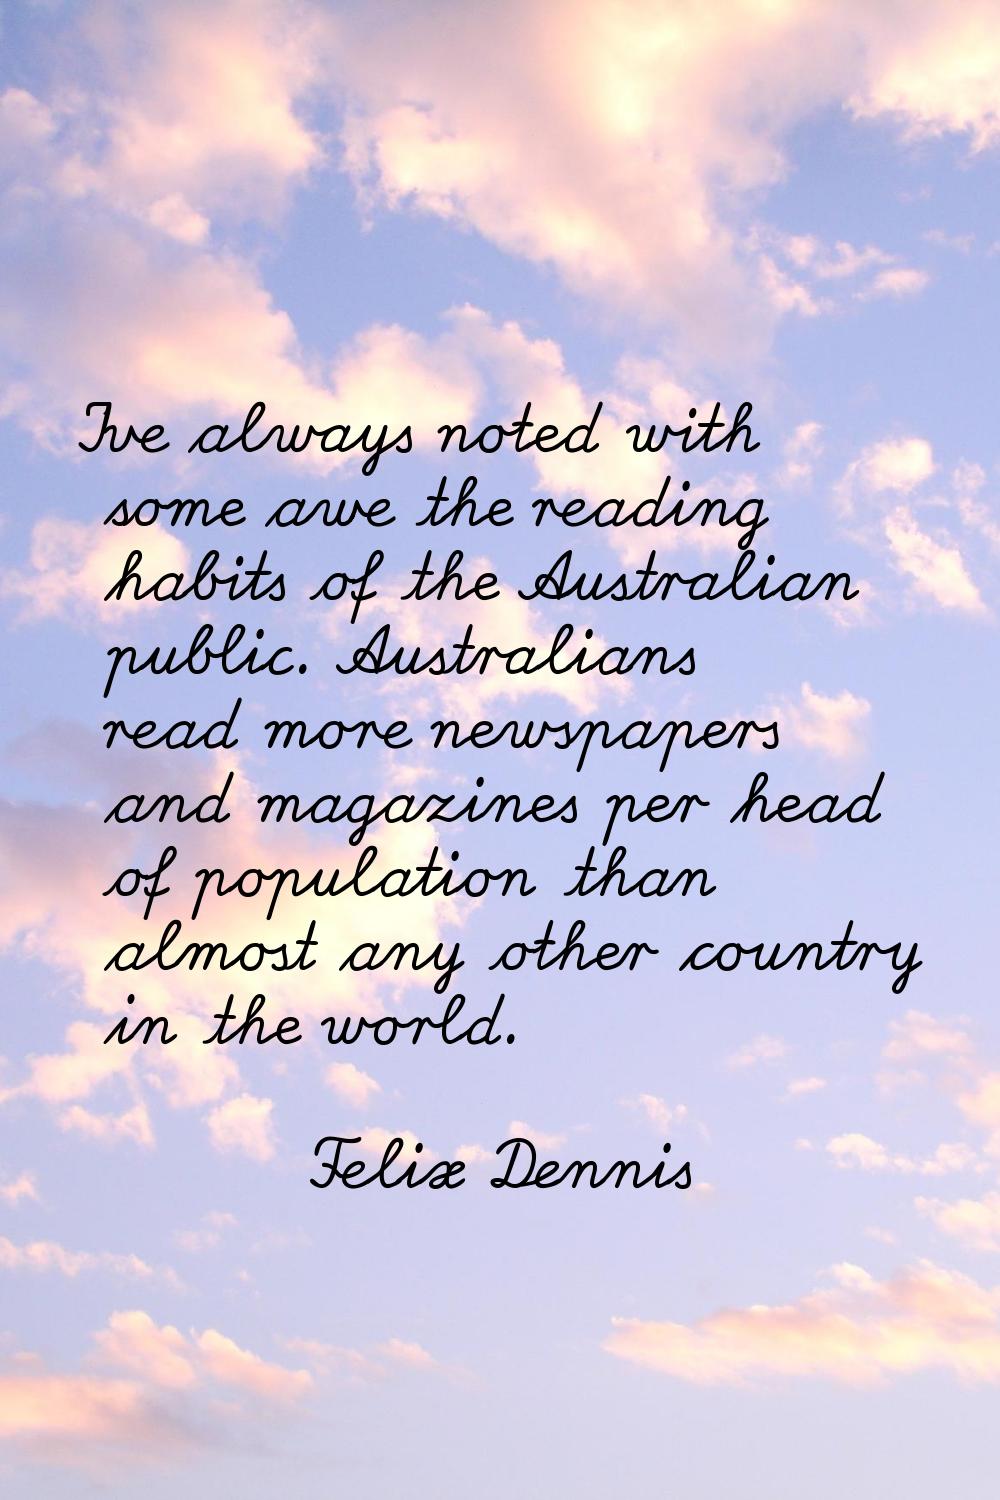 I've always noted with some awe the reading habits of the Australian public. Australians read more 